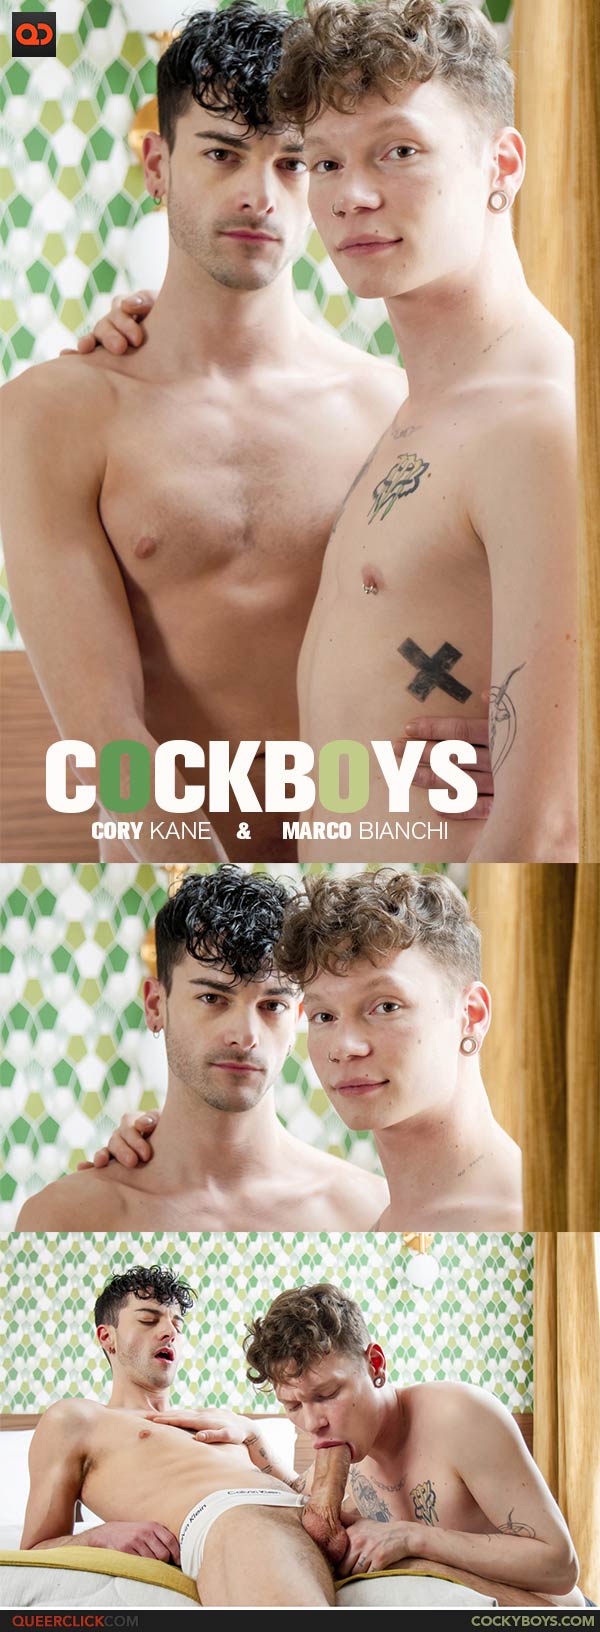 CockyBoys: Marco Bianchi Gets Pounded by Cory Kane